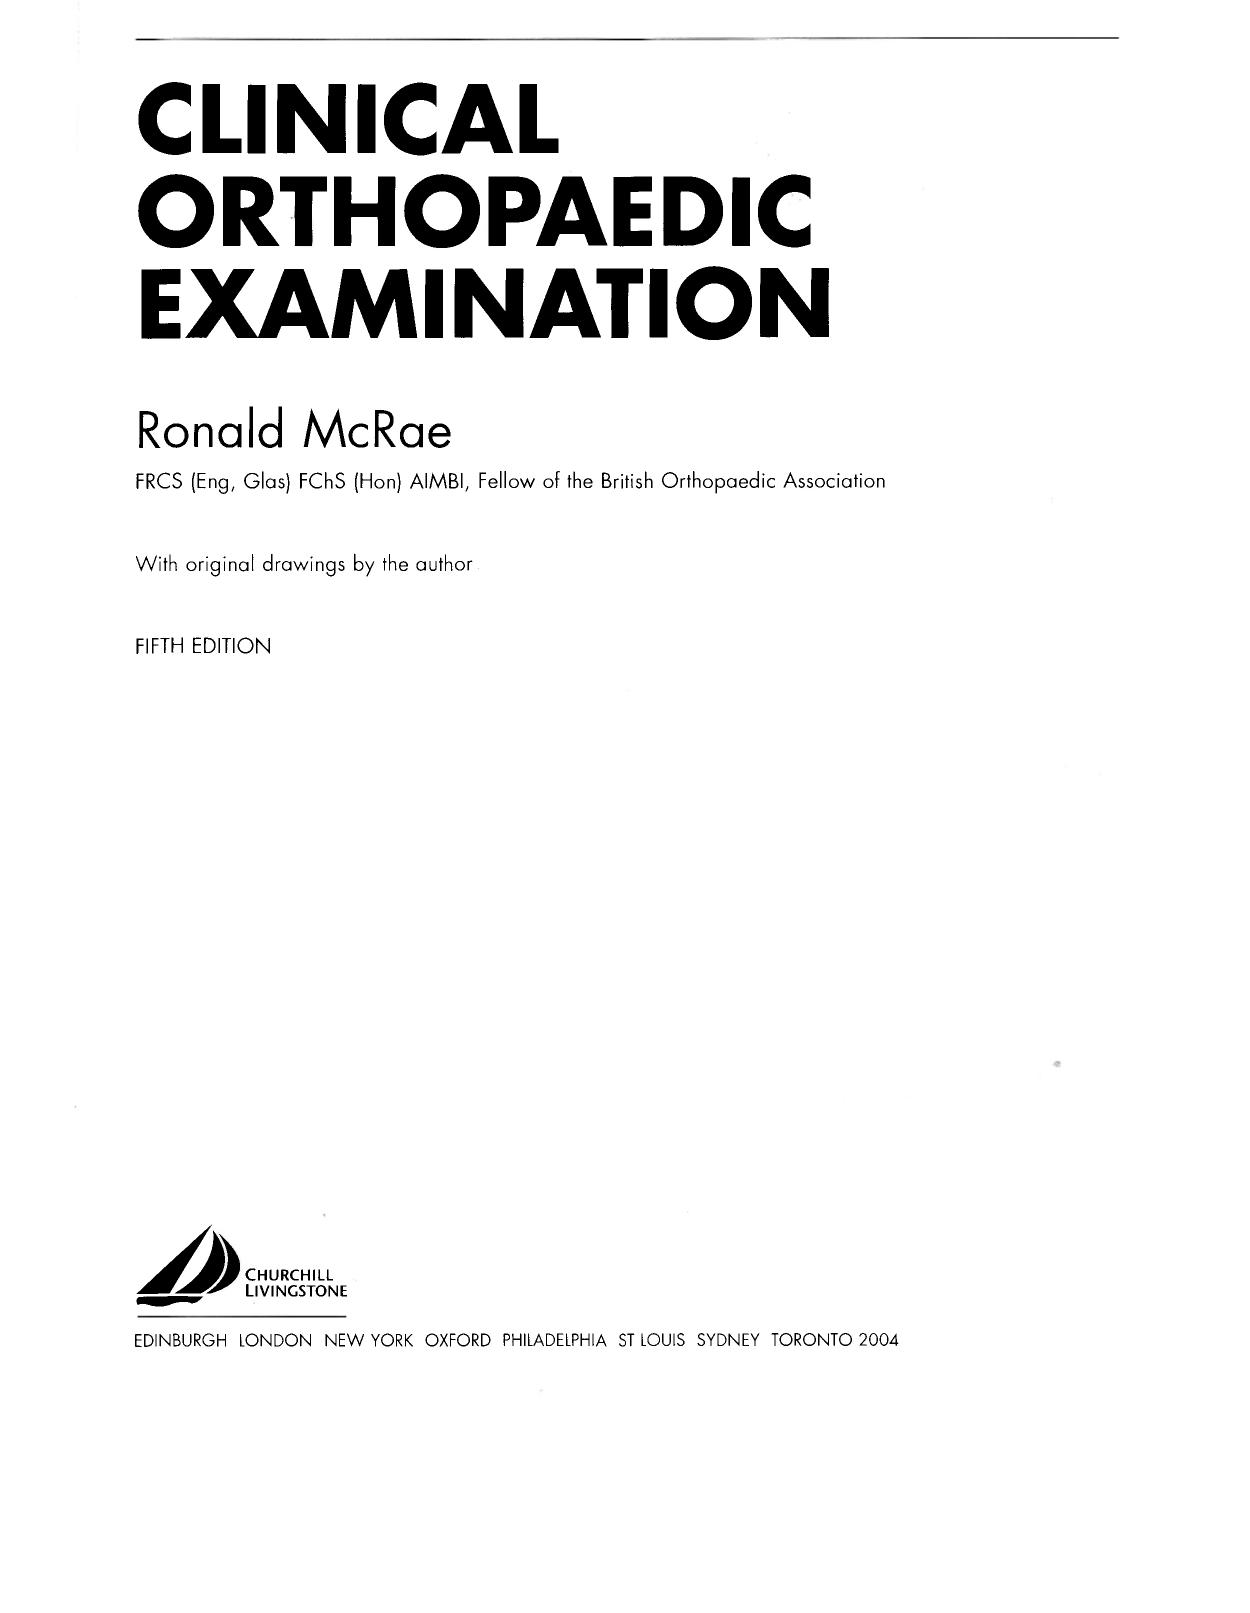 Clinical Orthopaedic Examination, Fifth Edition (2004)-1